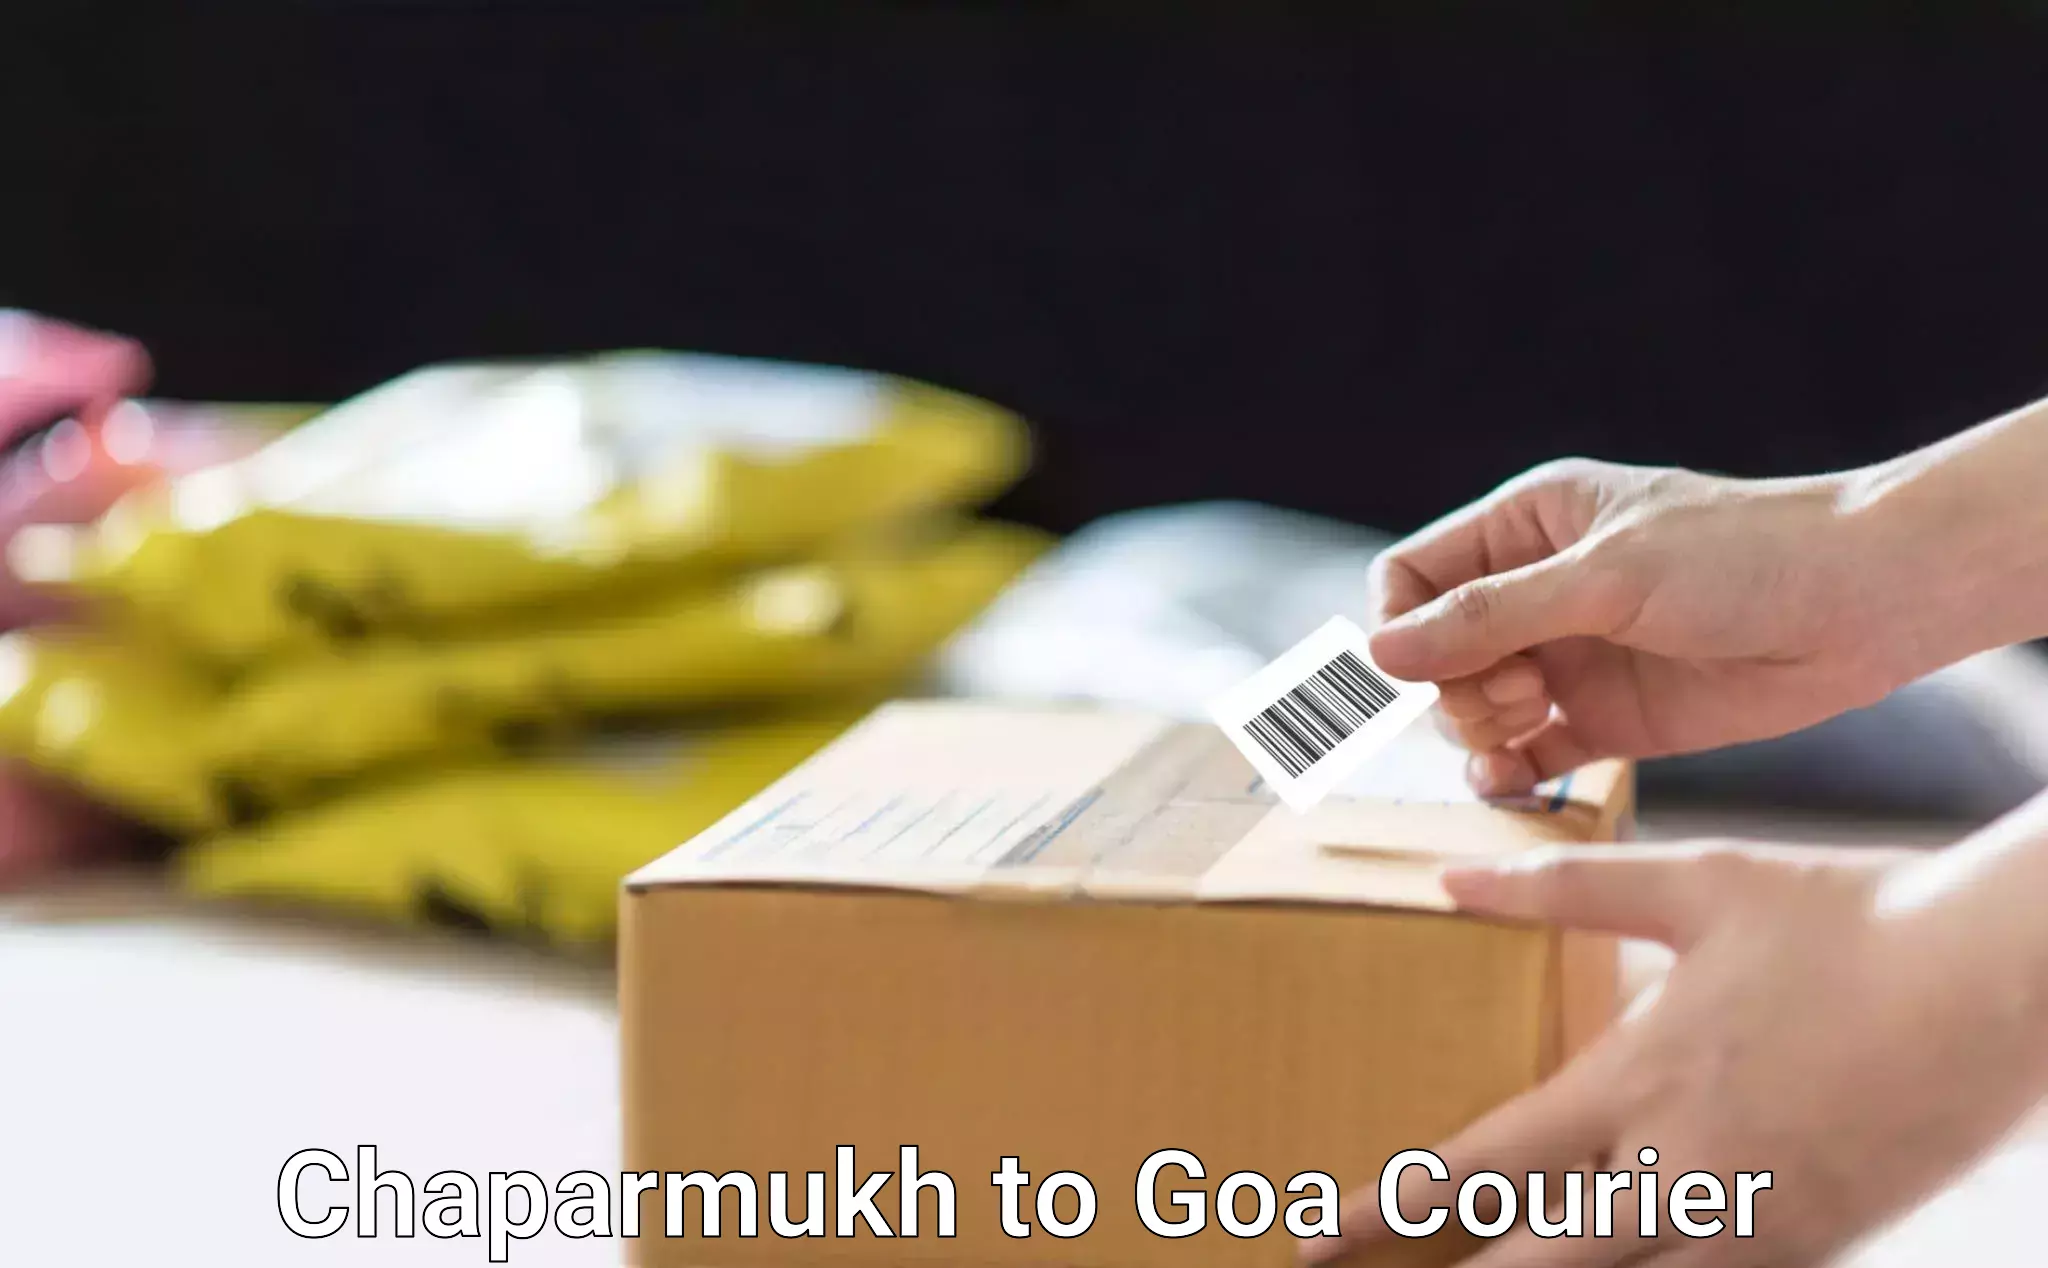 Return courier service Chaparmukh to Goa